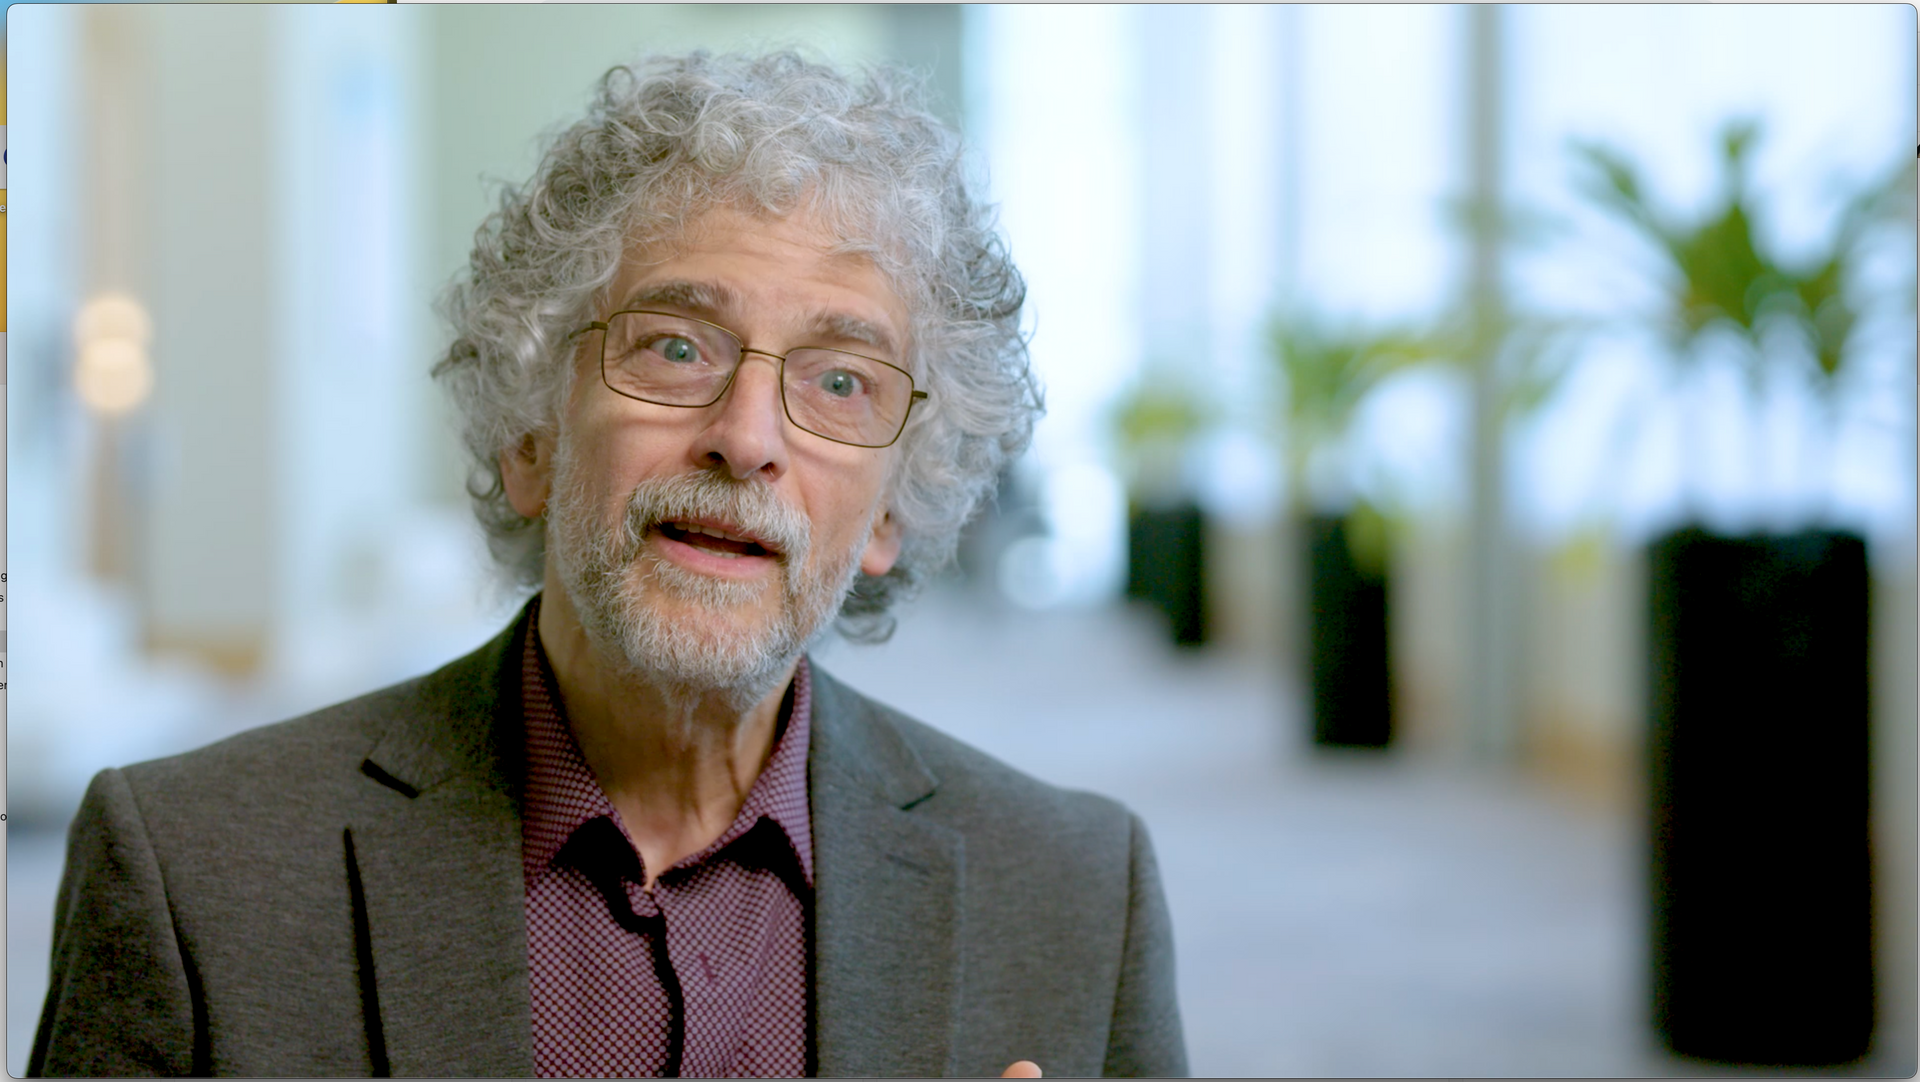 A mature man with gray curly hair and wire rimmed glasses is looking at the camera with a surprised face